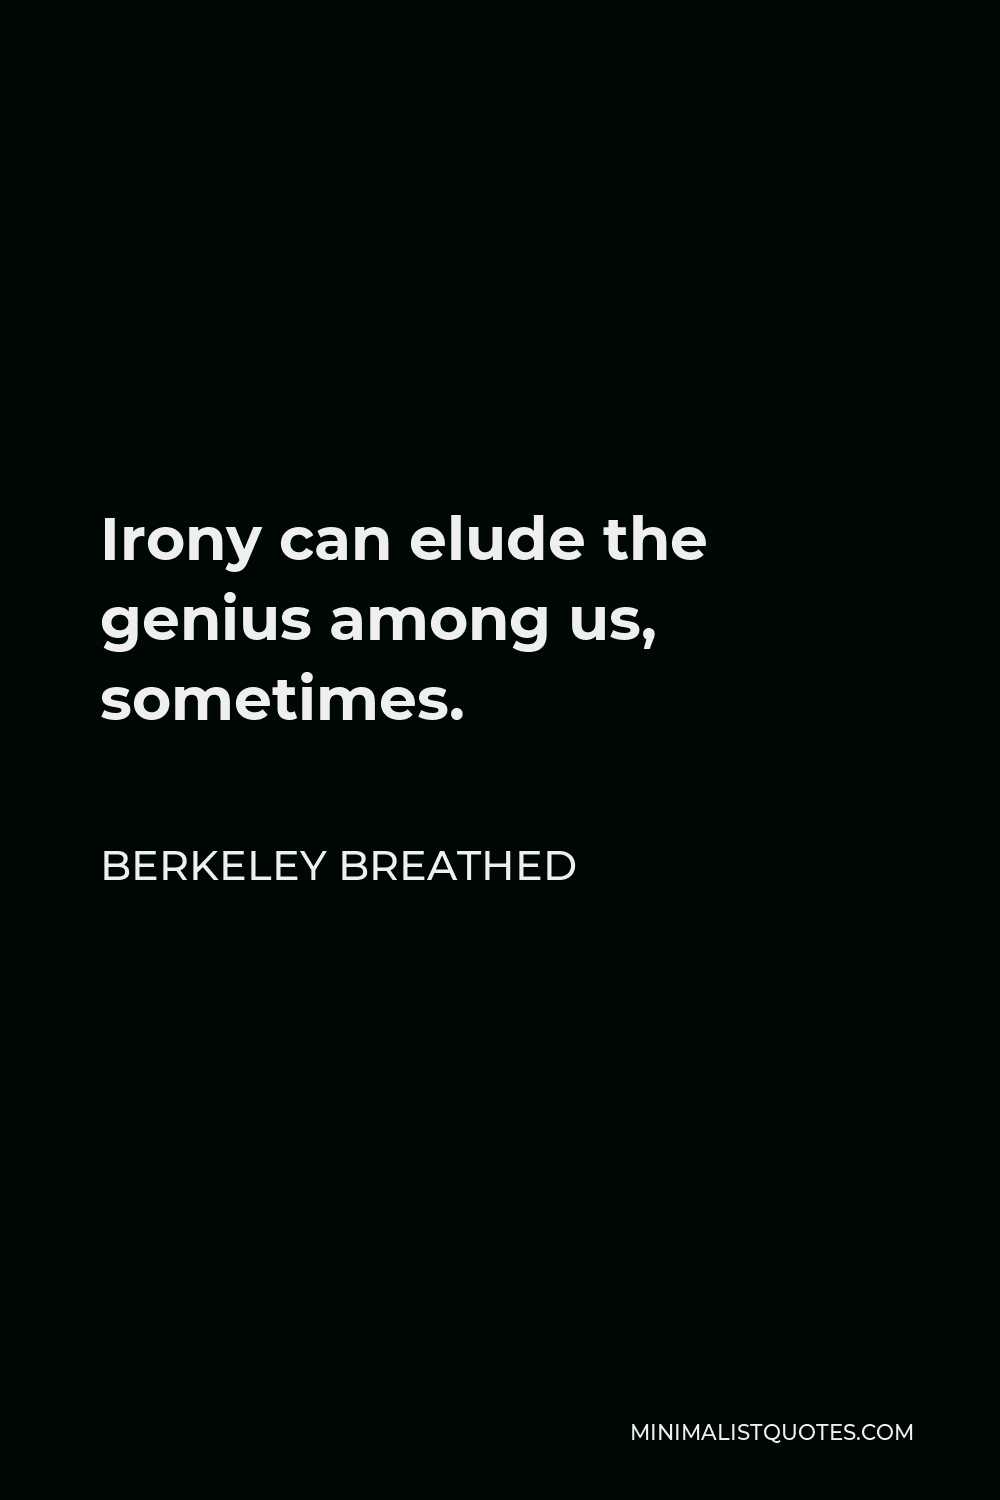 Berkeley Breathed Quote - Irony can elude the genius among us, sometimes.